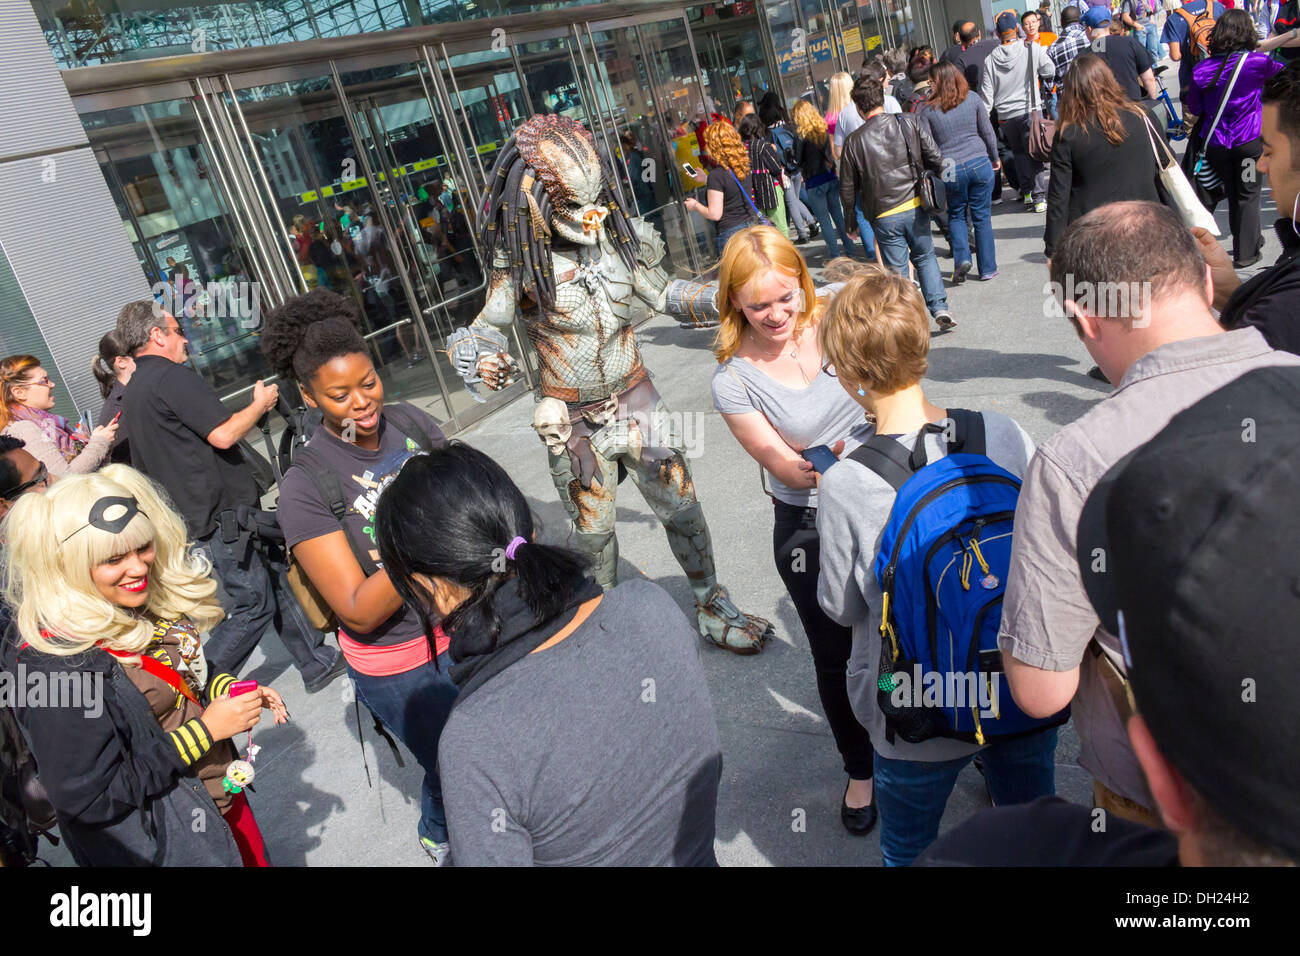 A crowd of visitors and fans to the ComicCon comic book and movie convention. Stock Photo